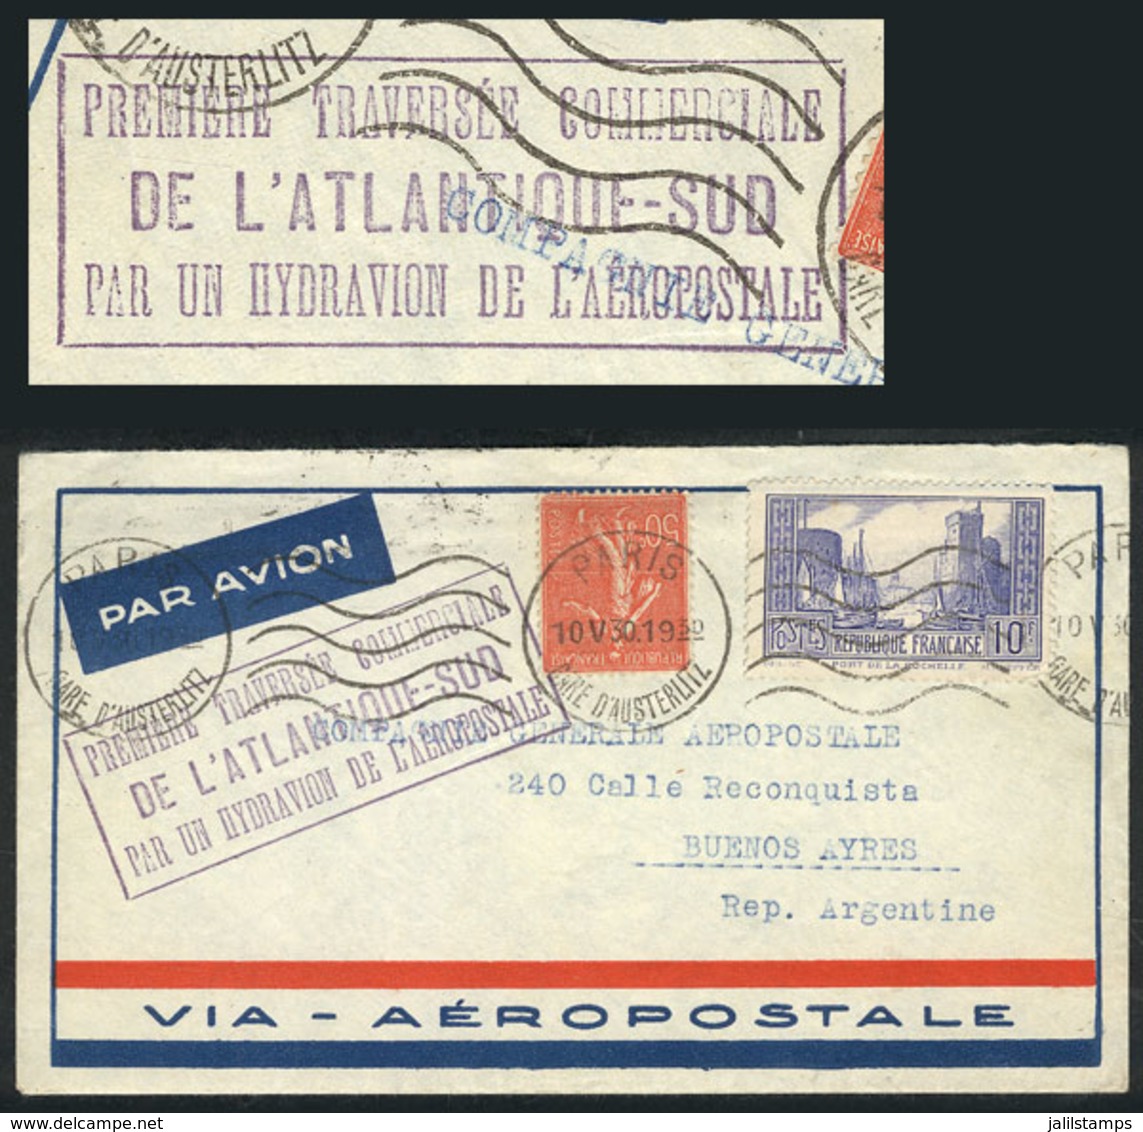 FRANCE: 10/MAY/1930 Paris - Buenos Aires: First Commercial Flight Over The South Atlantic By Seaplane Of The Aeropostale - Covers & Documents